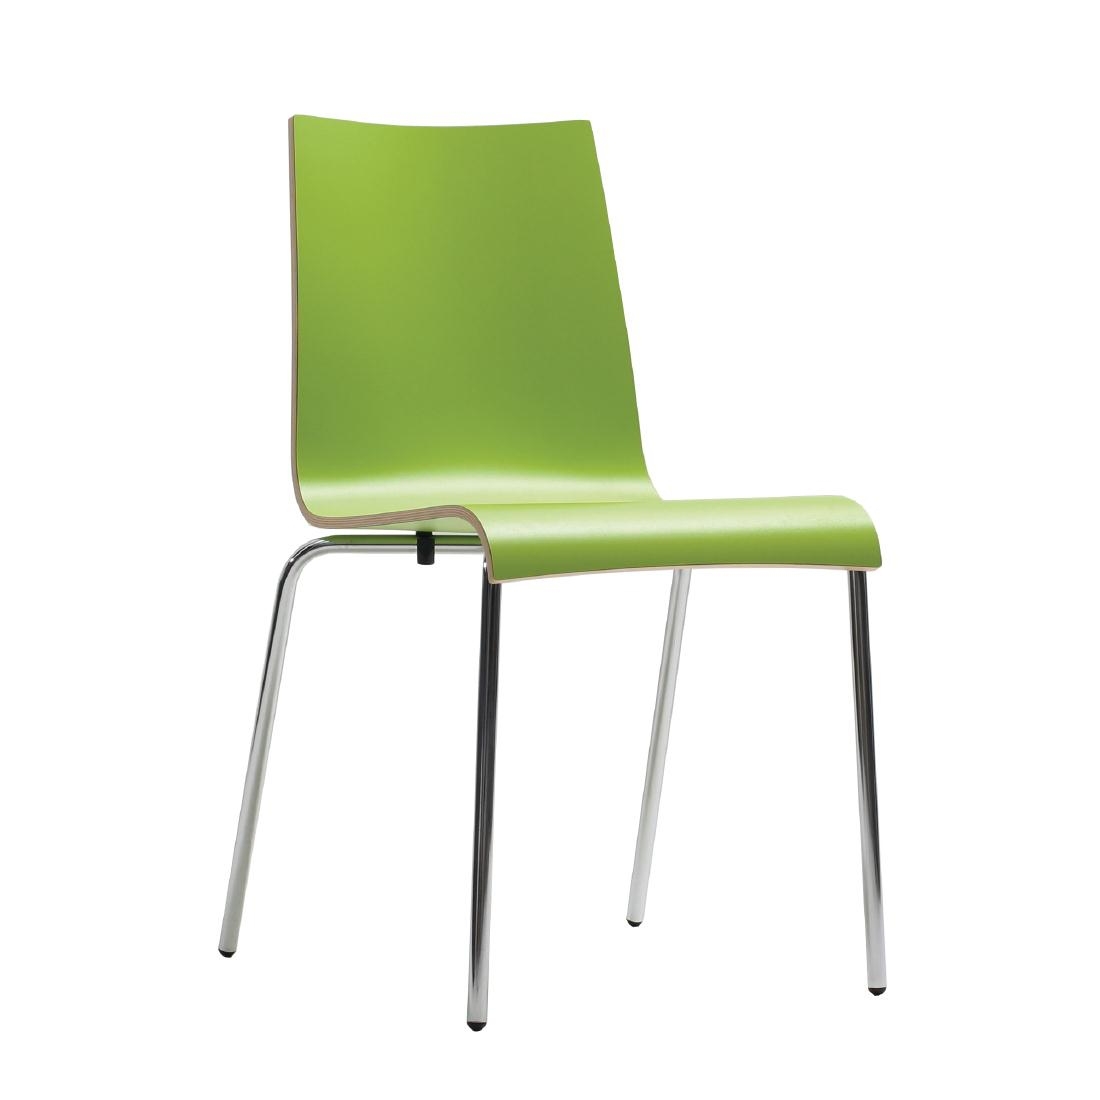 Bolero Plyform Stacking Sidechair Lime Green (Pack of 4)